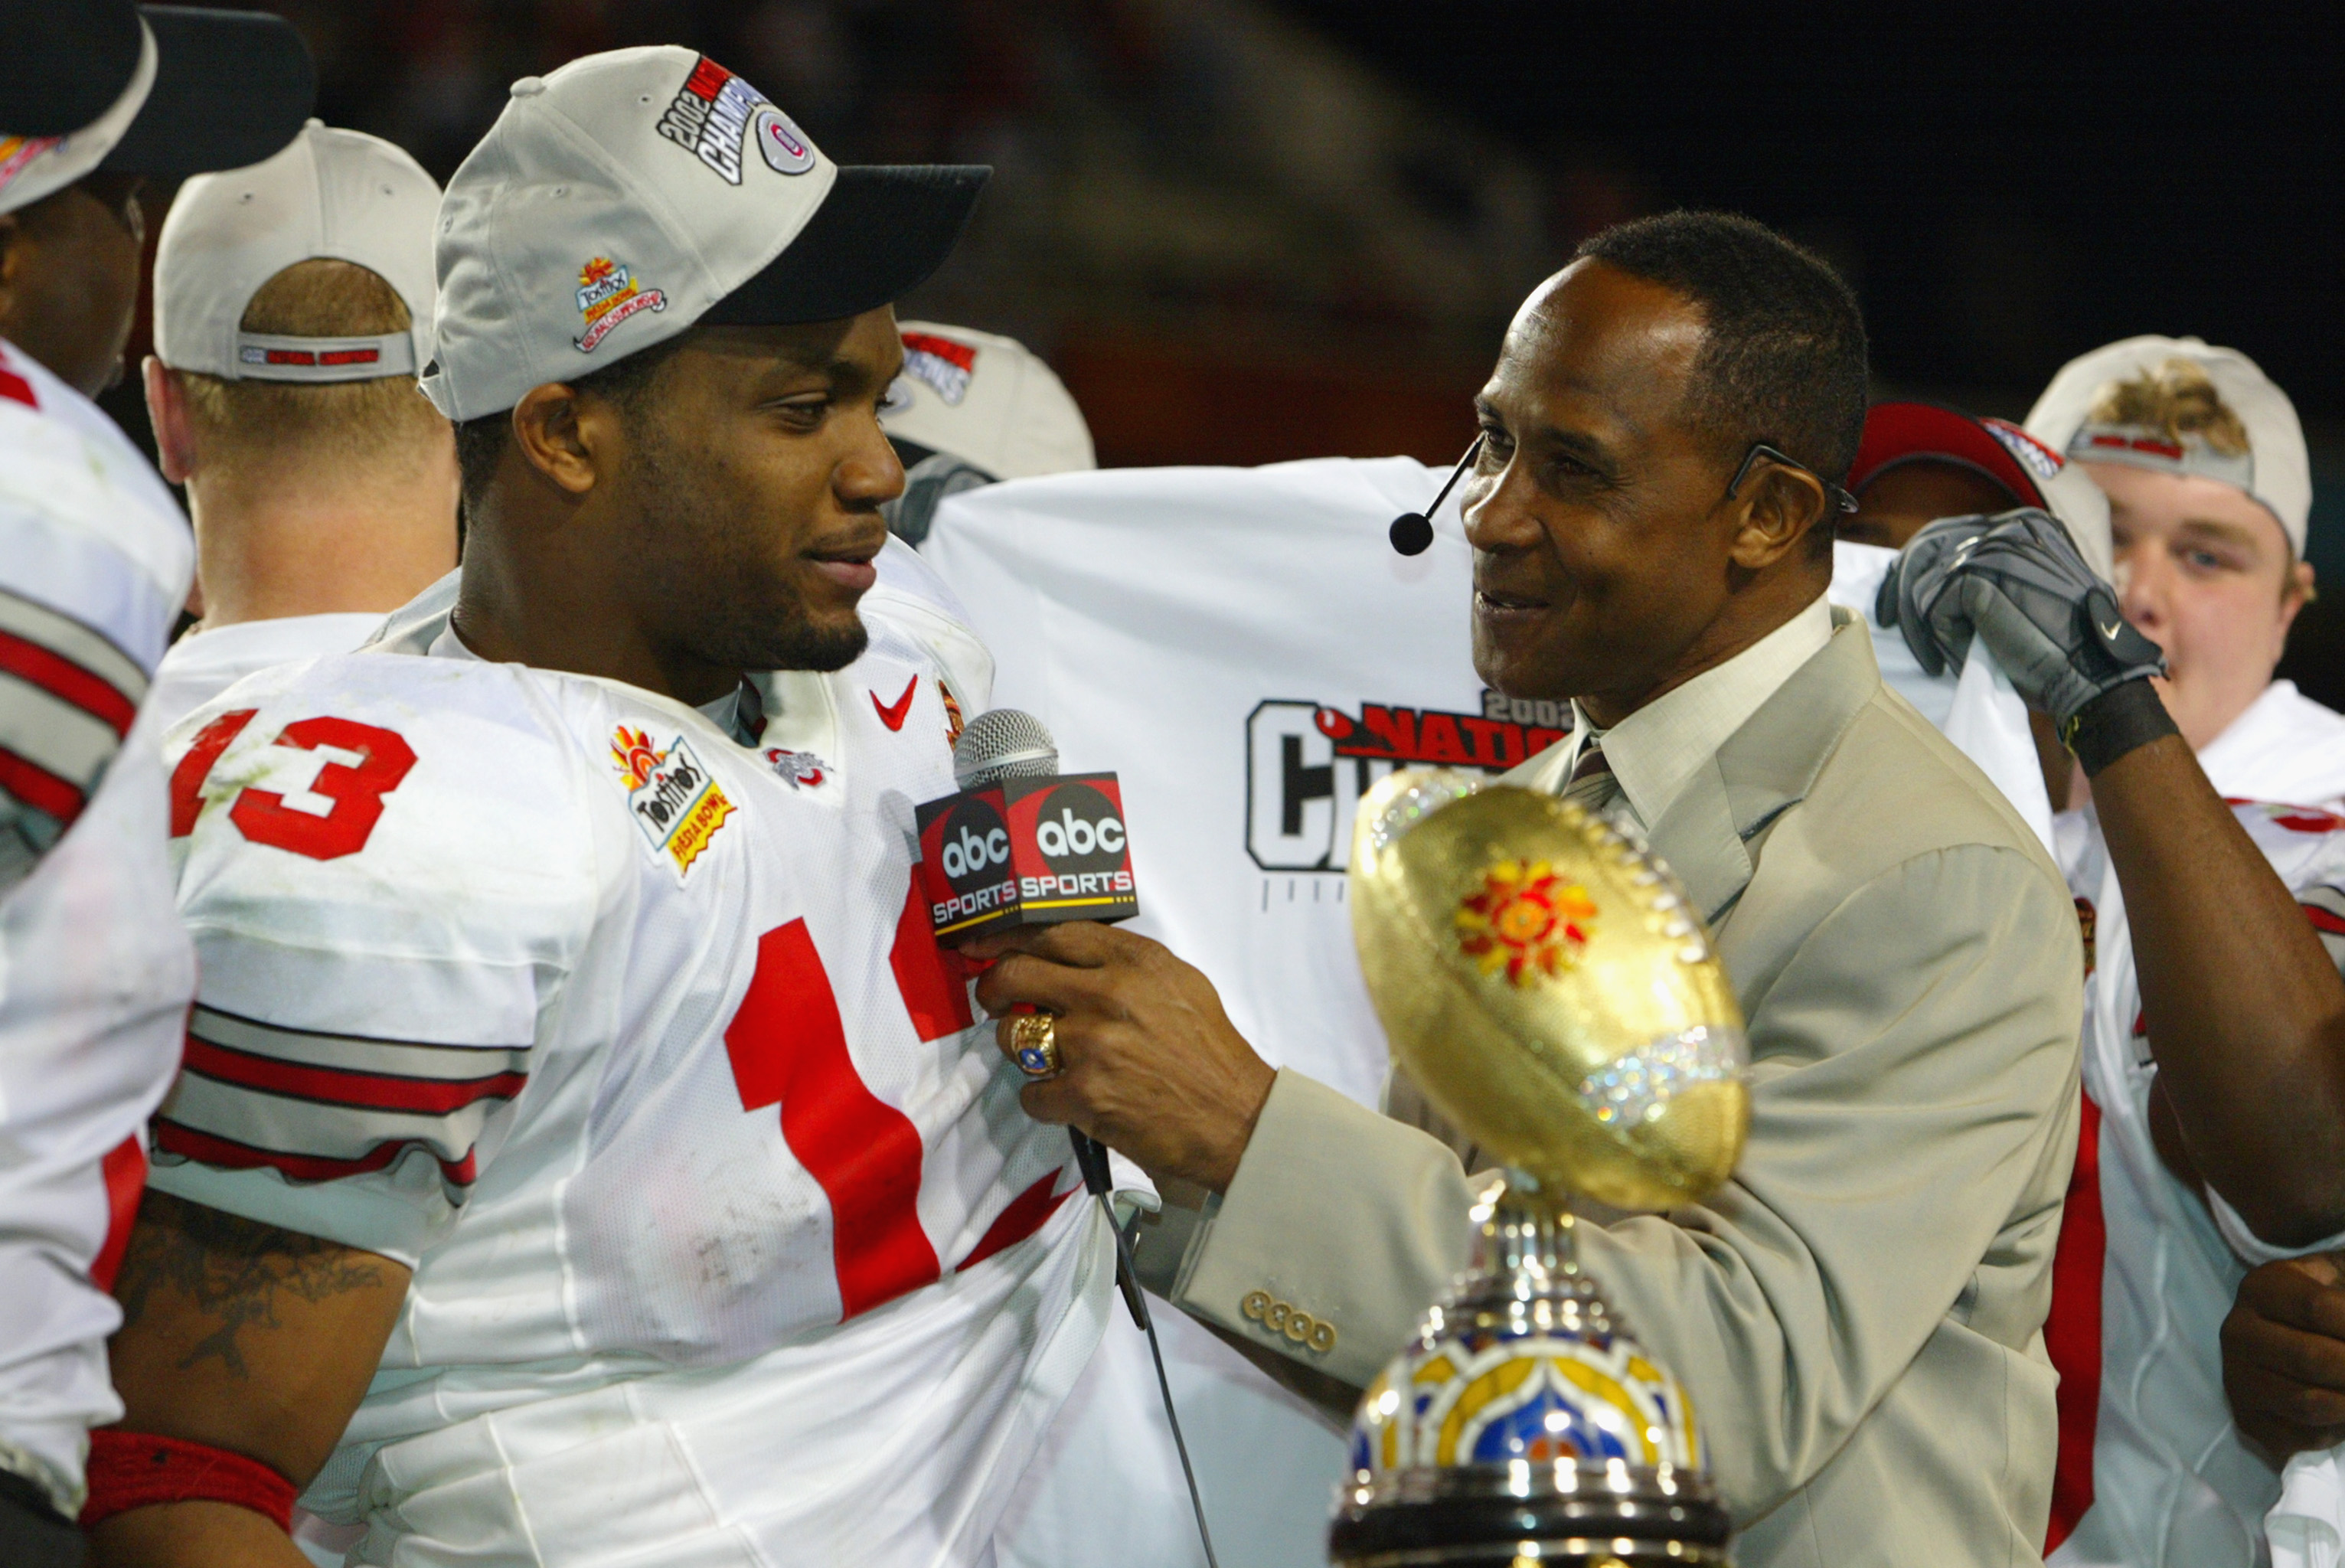 TEMPE, AZ - JANUARY 3:  Running back Maurice Clarett #13 of the Ohio State Buckeyes is interviewed by Lynn Swann after deafeating the Miami Hurricanes in the Tostitos Fiesta Bowl on January 3, 2003 at Sun Devil Stadium in Tempe, Arizona.  Ohio State won t